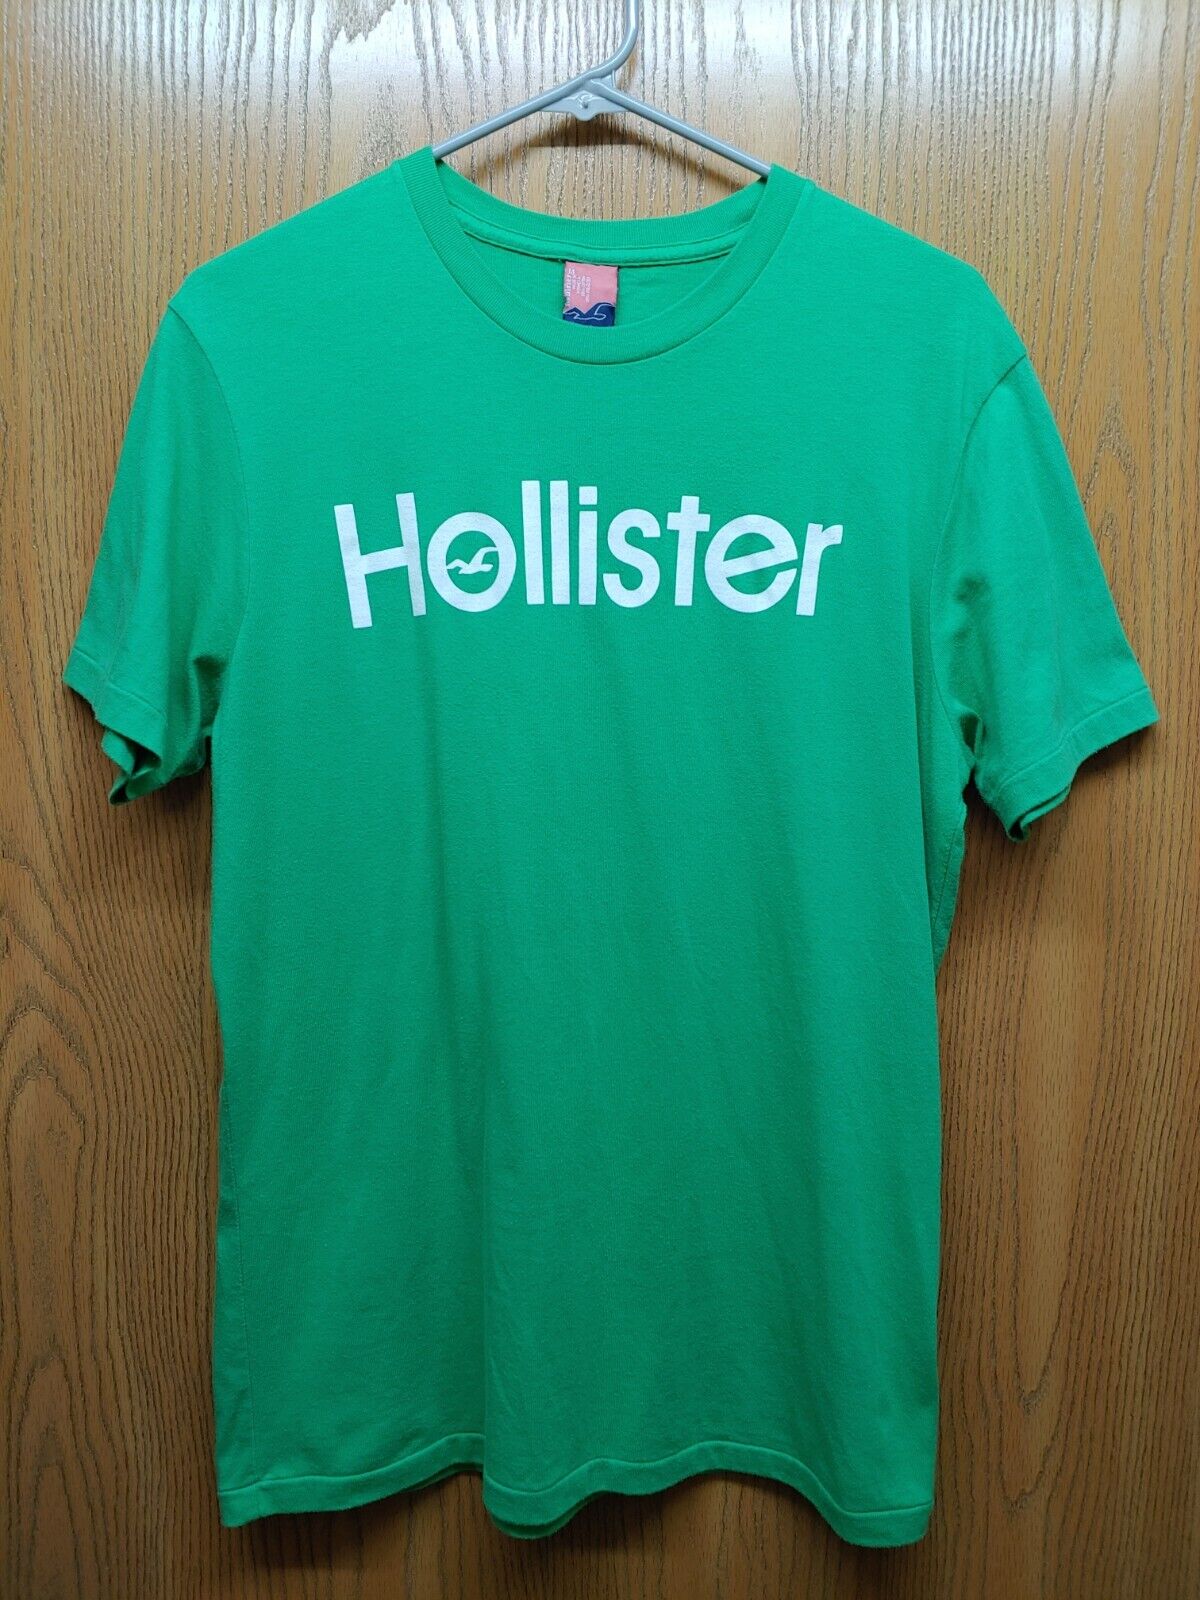 Vintage 2003 Hollister Abercrombie Mens Graphic Tee T-Shirt size M green